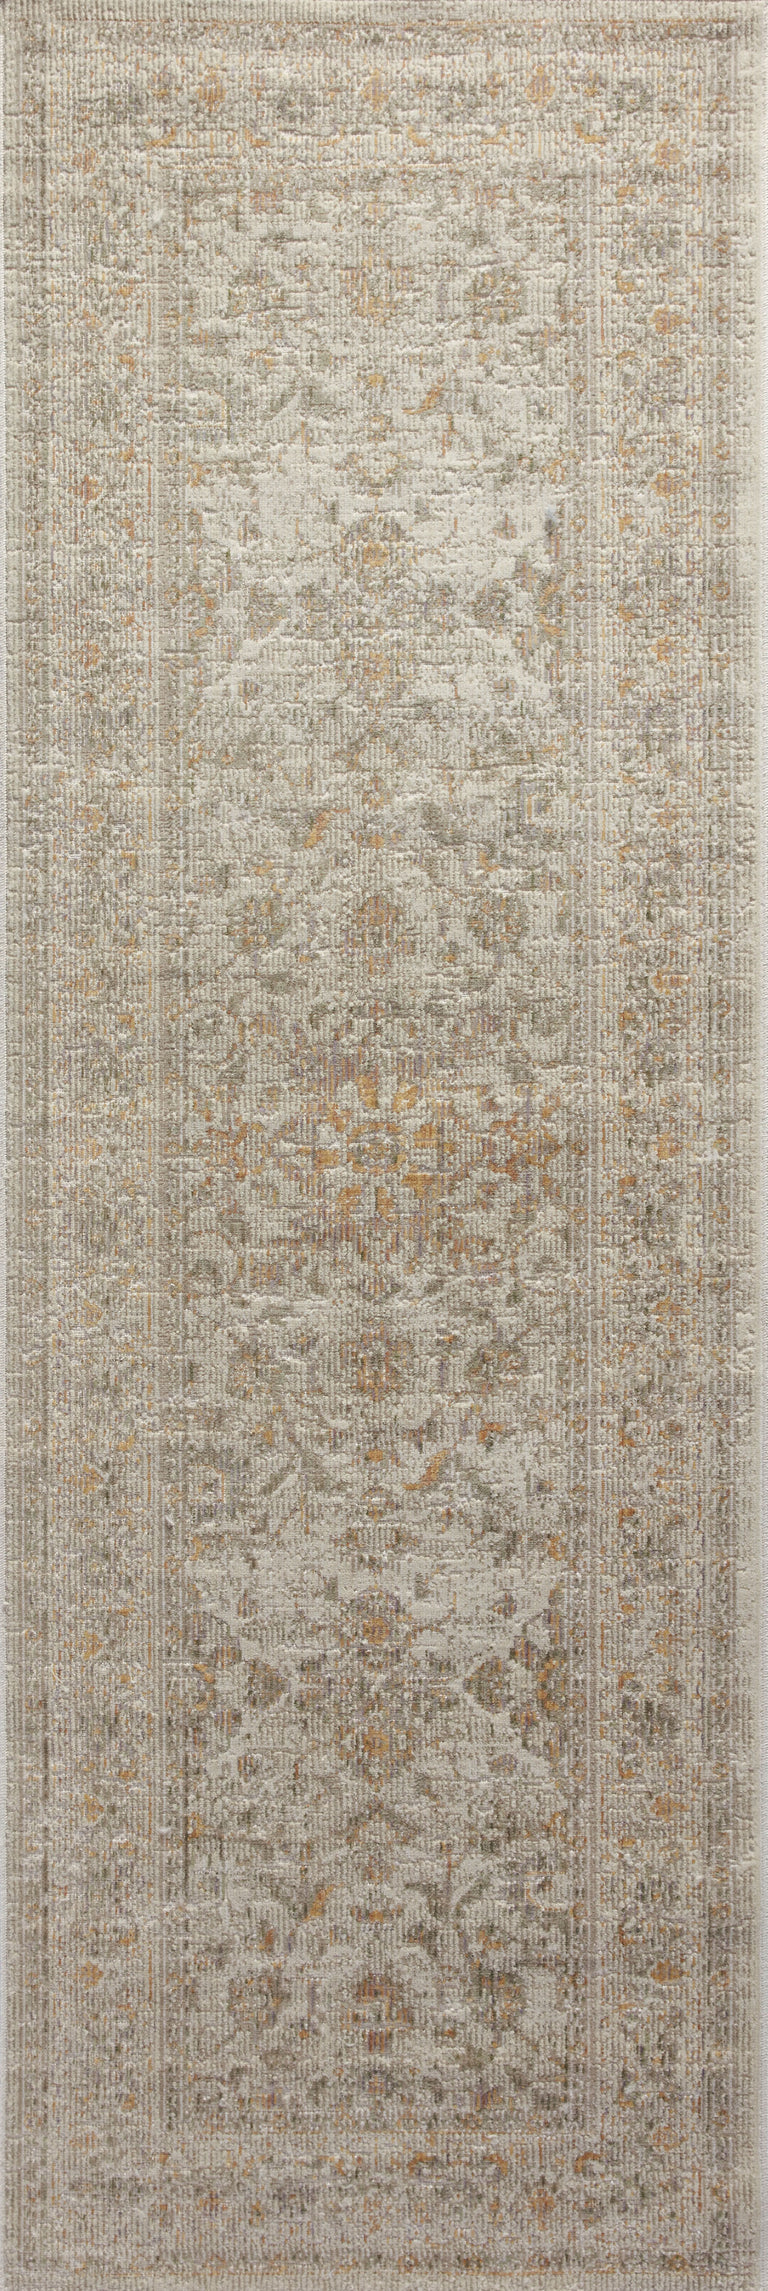 Chris Loves Julia x Loloi Rug in Ivory, Natural - 2'7" x 4'